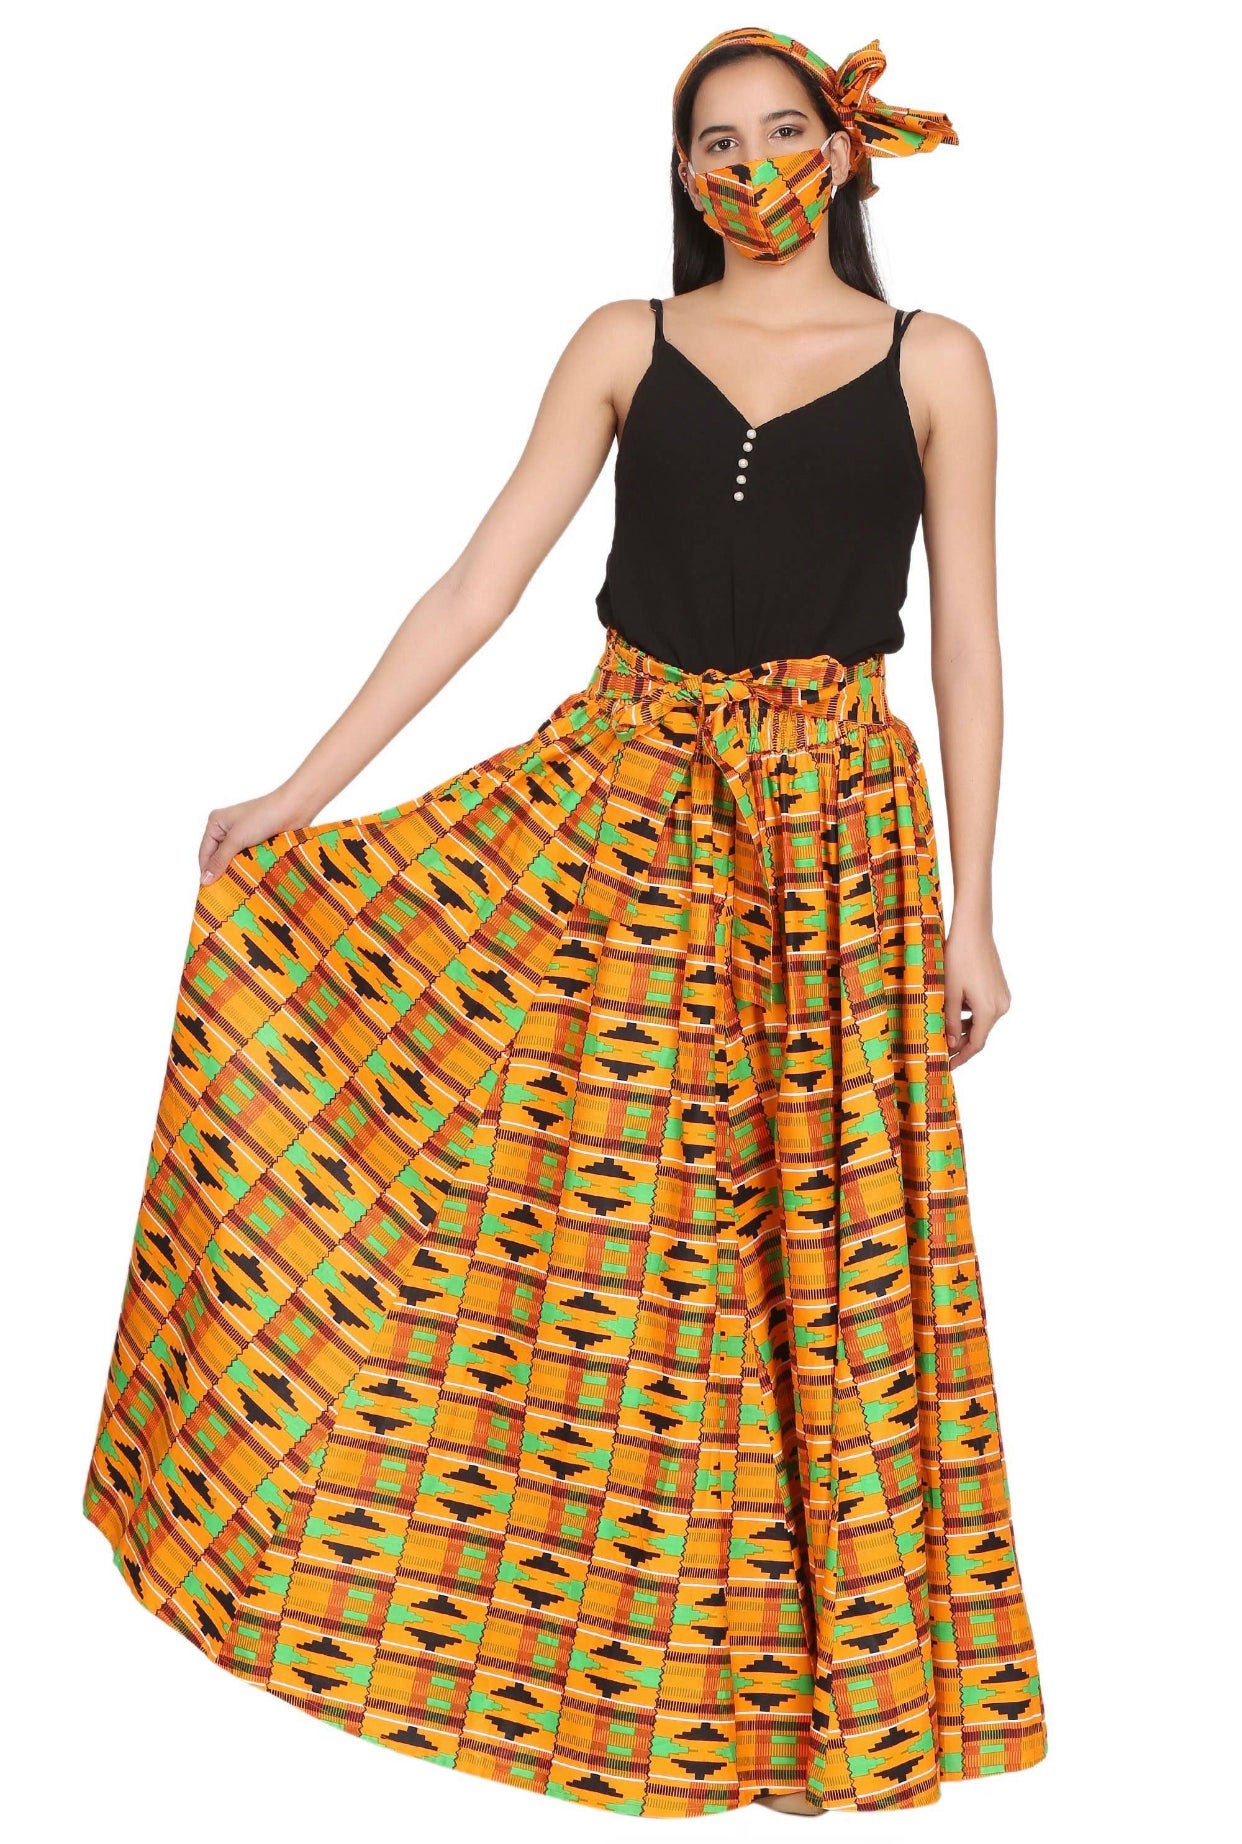 Hand Made African Print Full Skirt with Coordinating Head Wrap and Facemask (Orange, Green, Black)